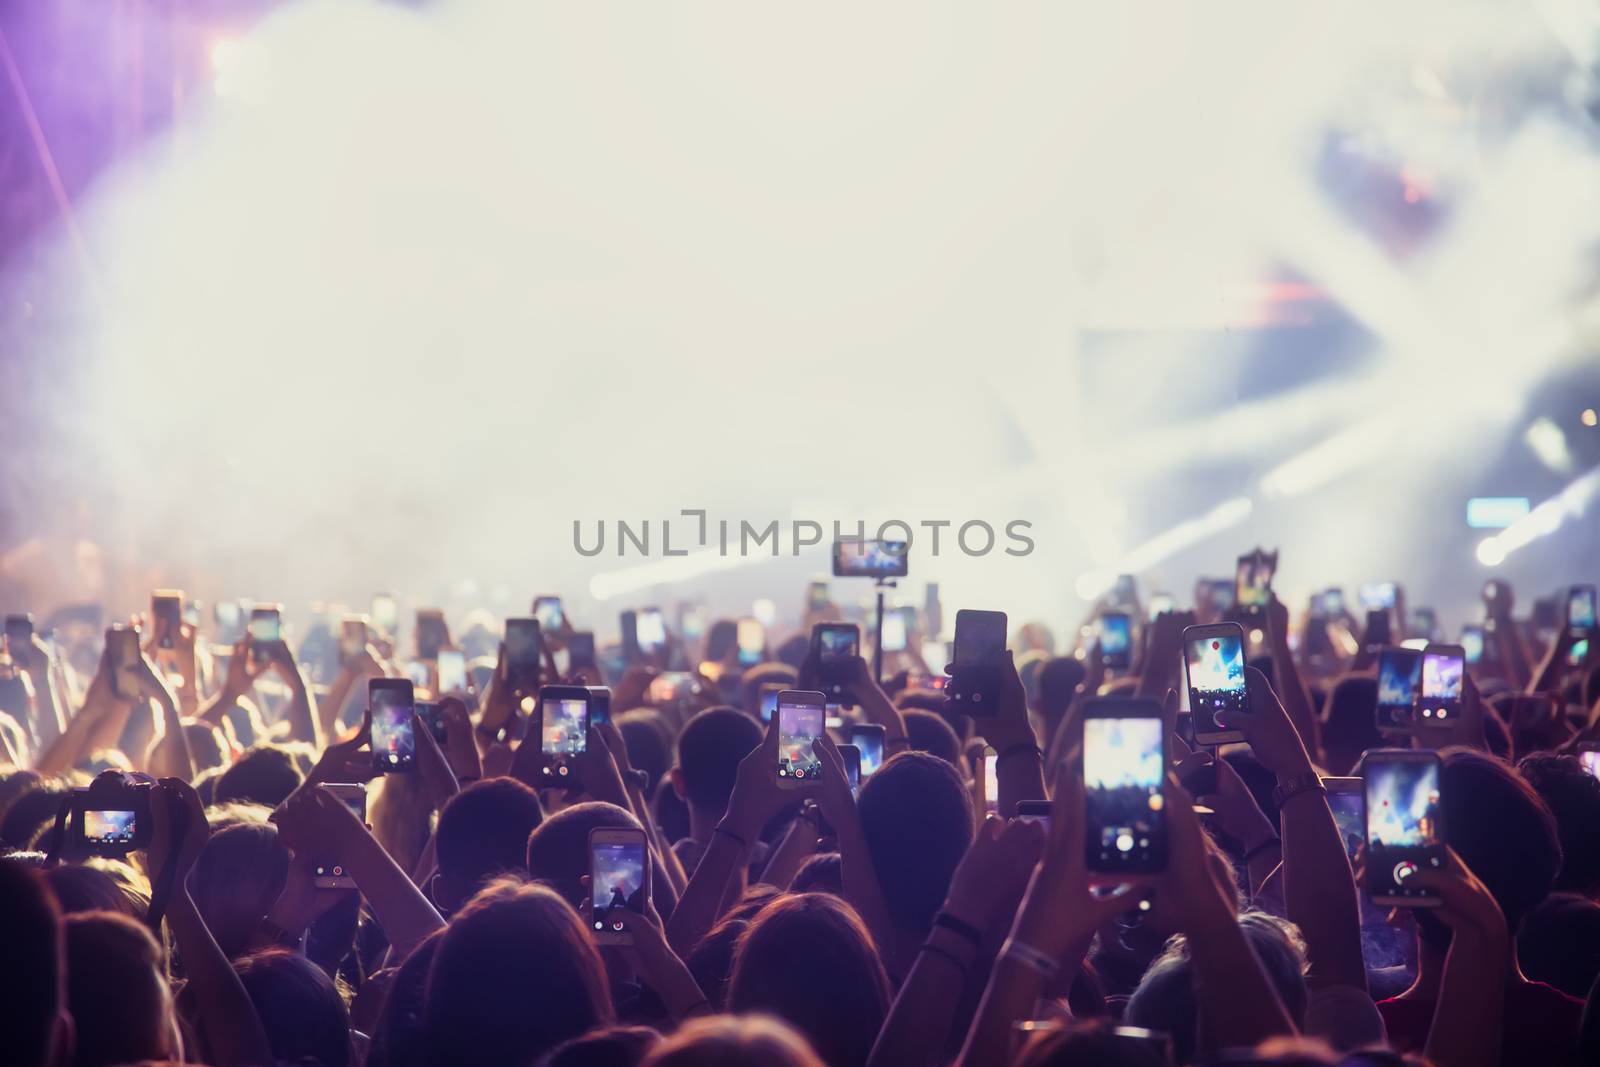 People taking photographs with smart phone during a public music concert